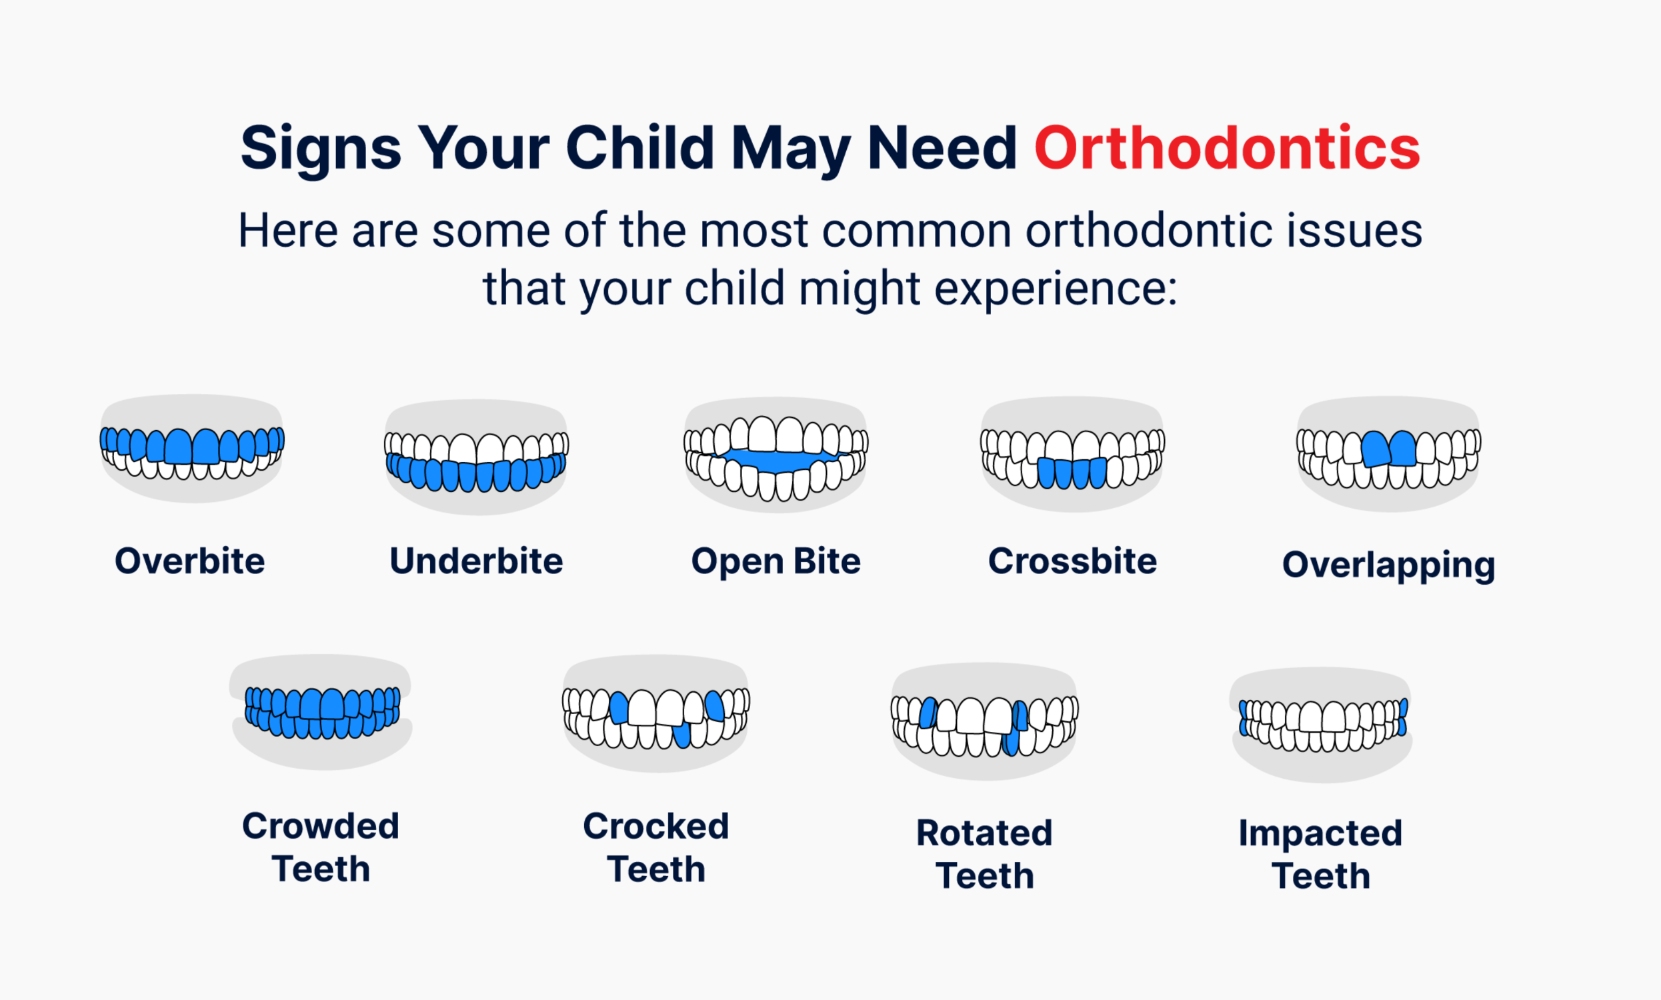 Signs your child may need orthodontics